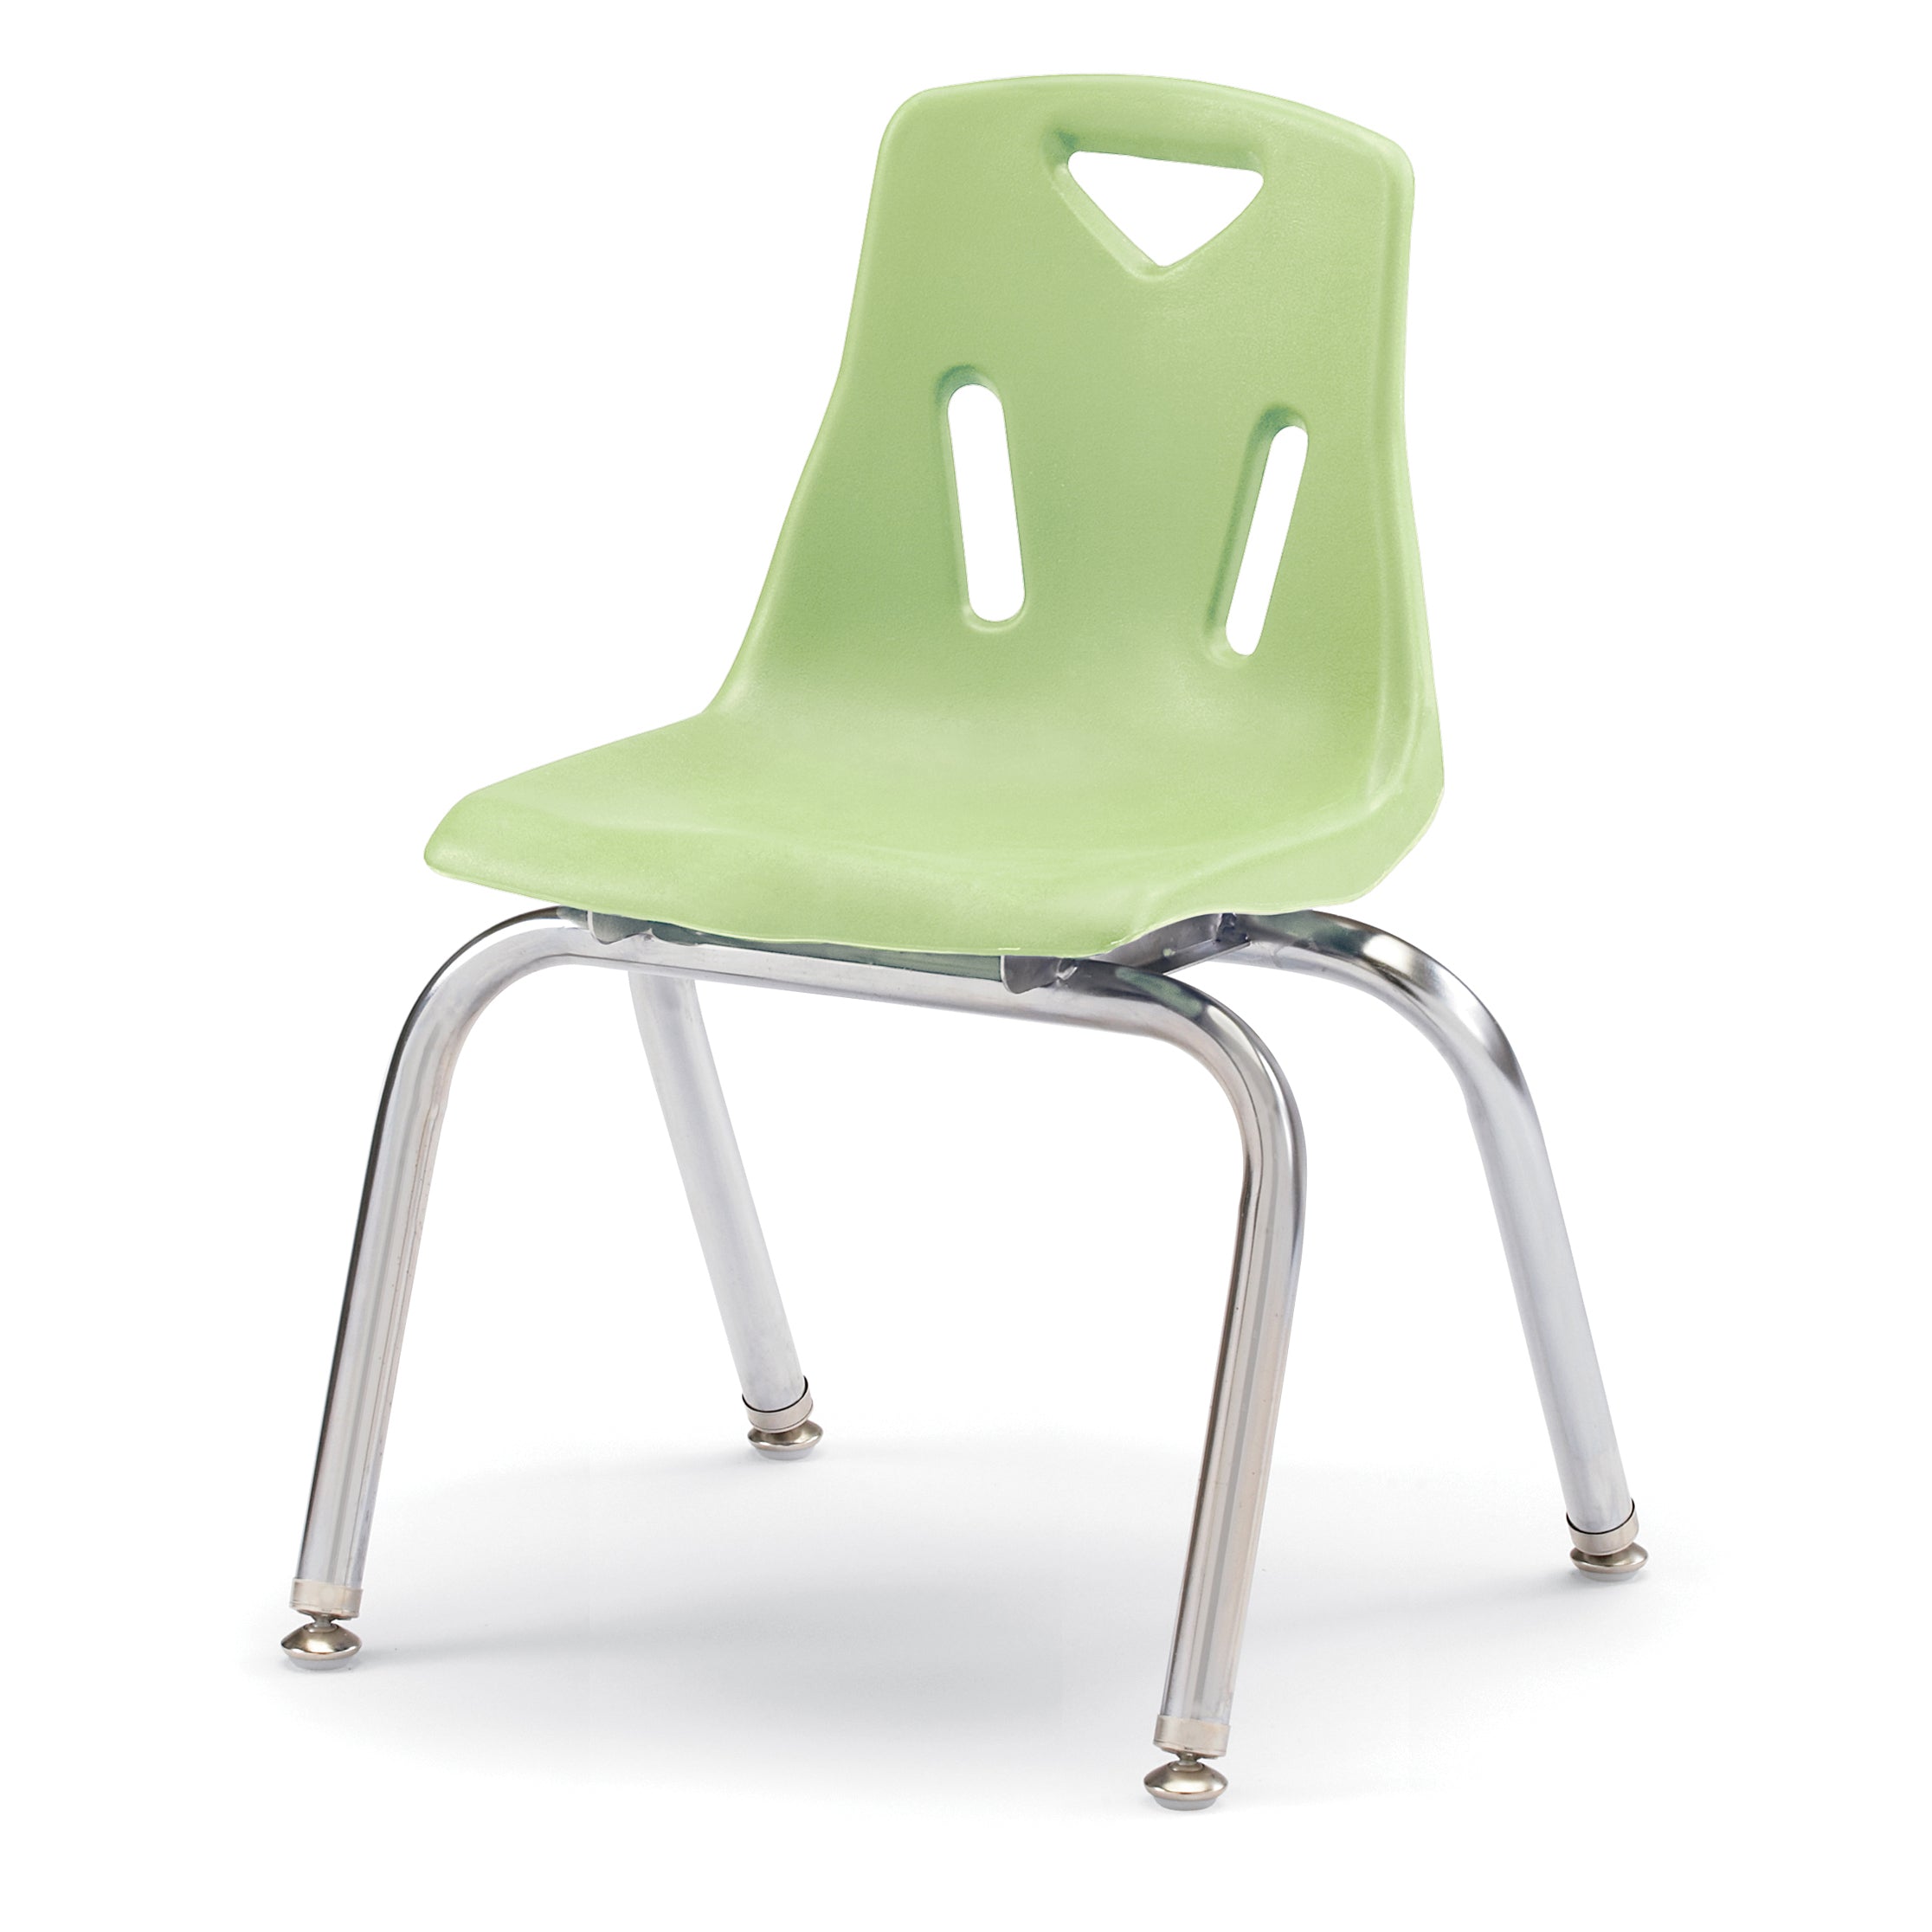 8144JC6130, Berries Stacking Chair with Chrome-Plated Legs - 14" Ht -  Set of 6 - Key Lime